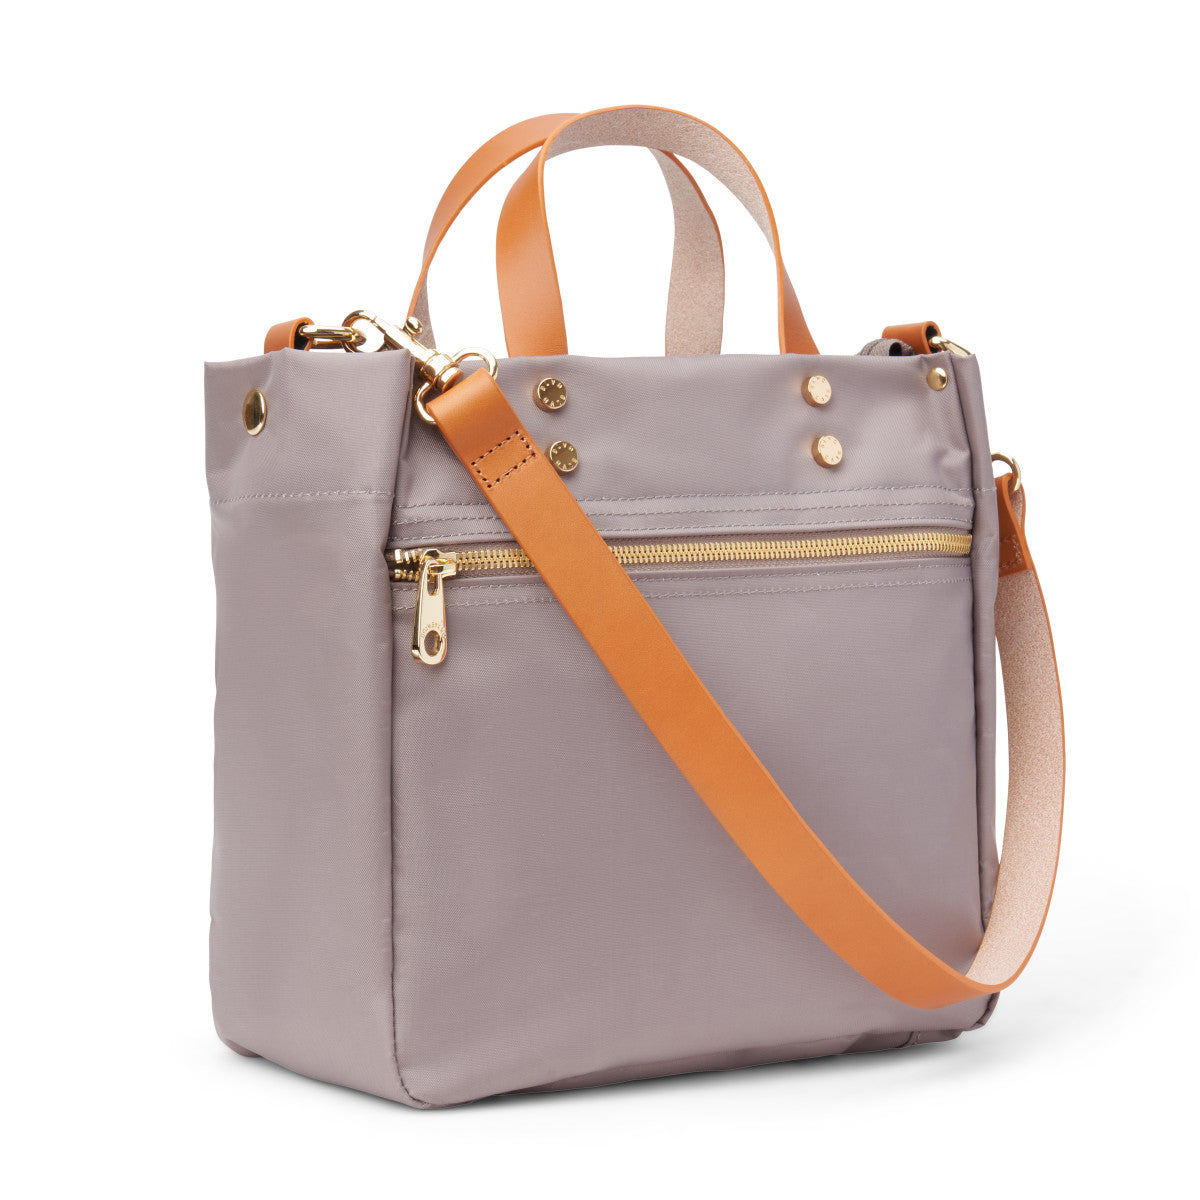 Joey Canvas Tote - Taupe (Ships in 1-2 Weeks)